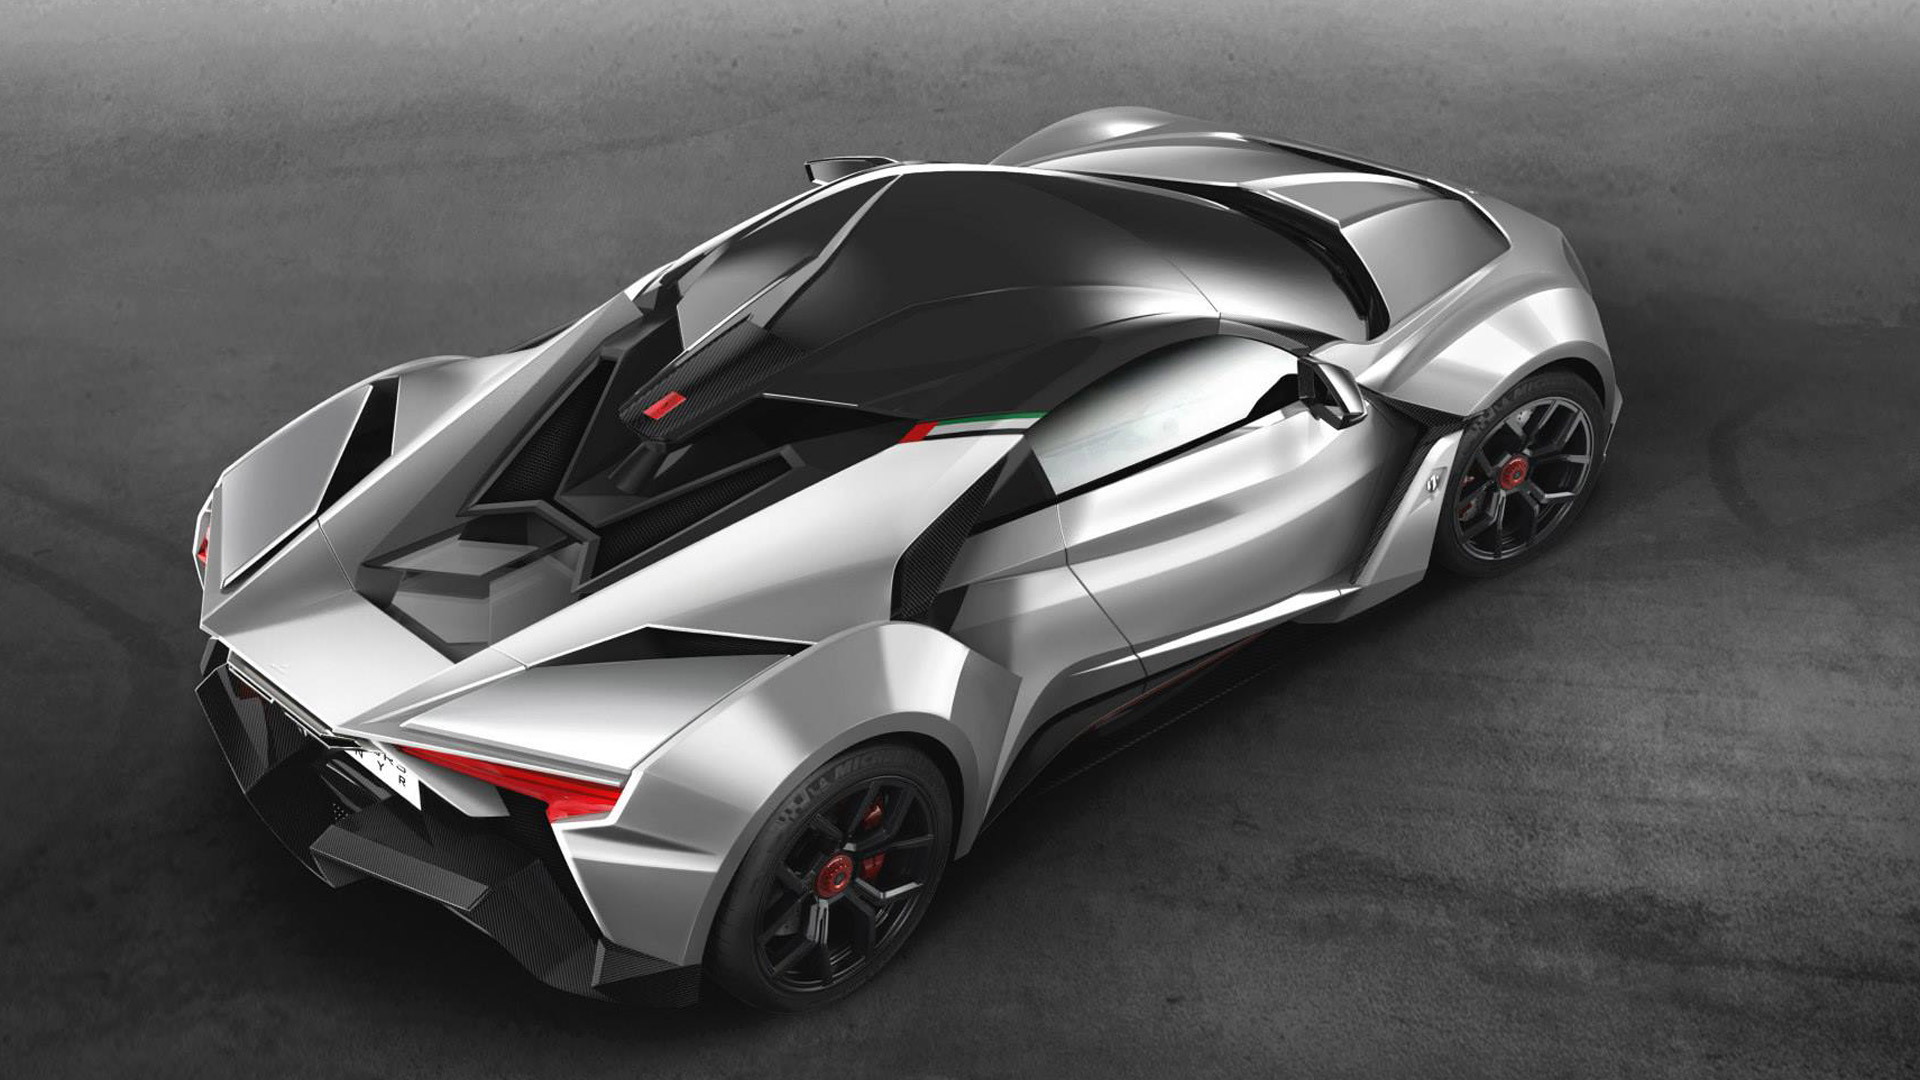 W Motors Fenyr Supersport debuts in Dubai with 900 horsepowerW Motors Fenyr Supersport debuts in Dubai with 900 horsepower